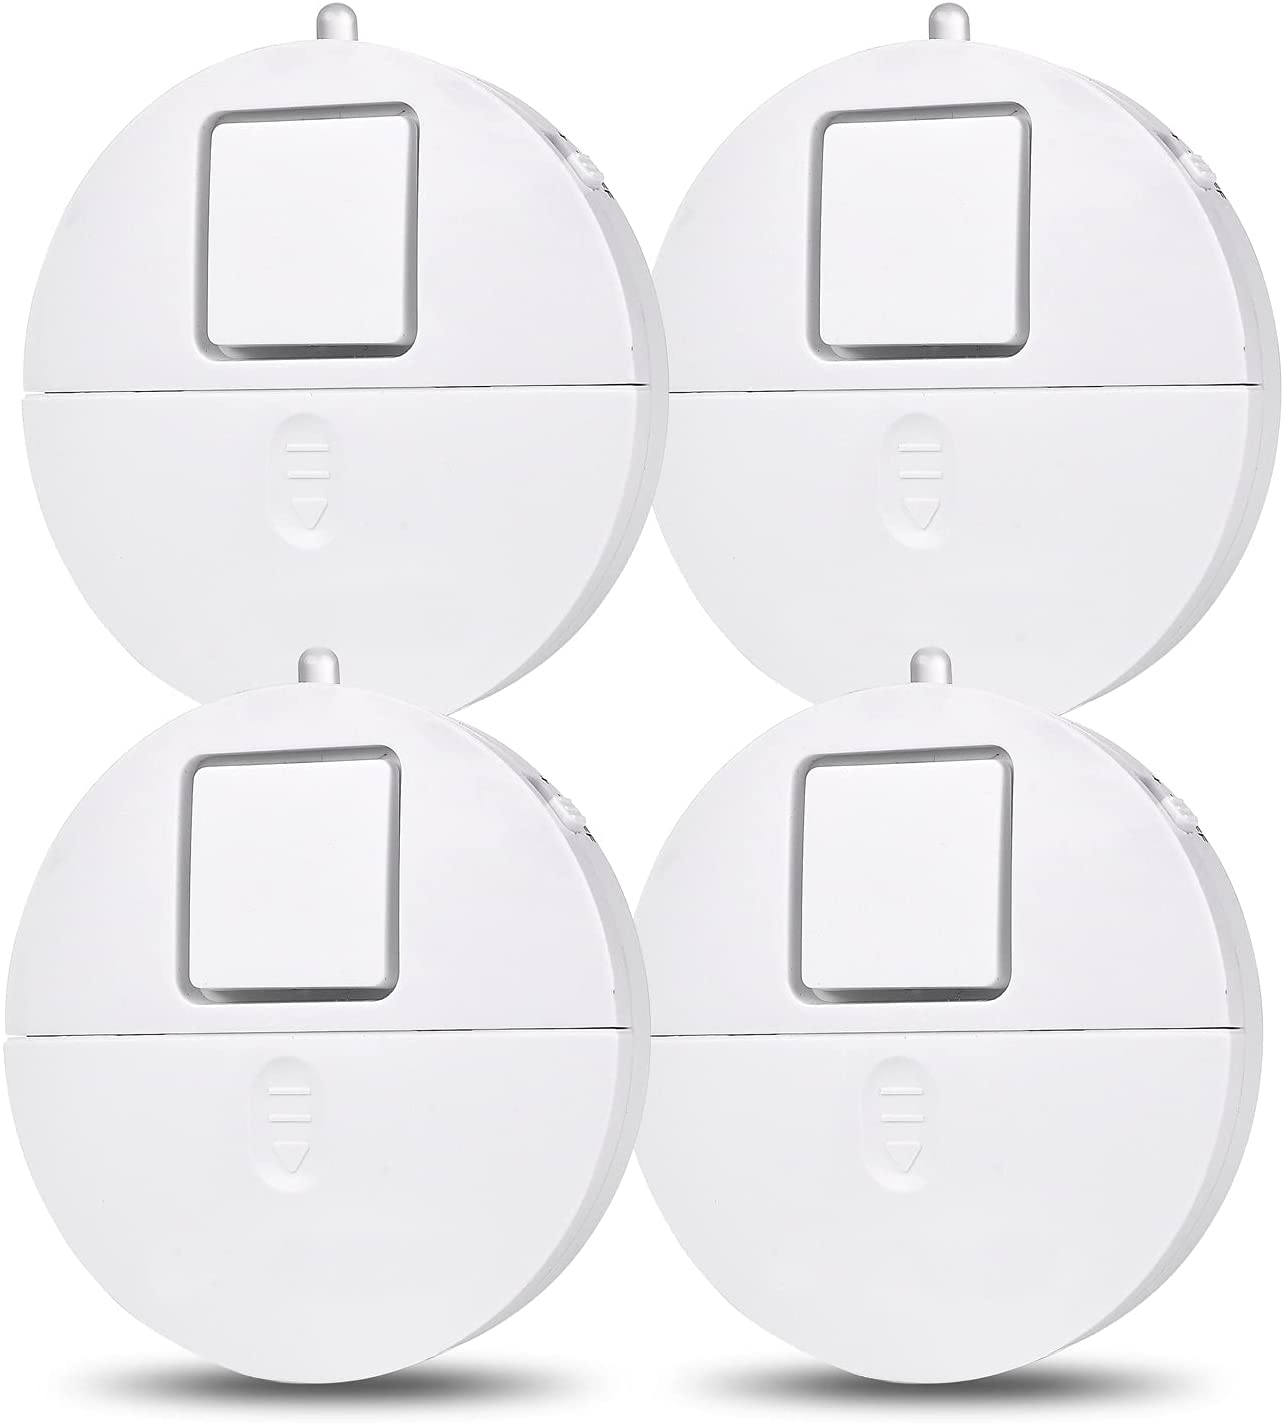 Window Alarm 4 Packs - Loud 120dB Alarm and Vibration Sensors Compatible with Virtually Any Window - Glass Break Security Alarm Sensor- Low Battery LED Indicator - (For 6 piece(s))